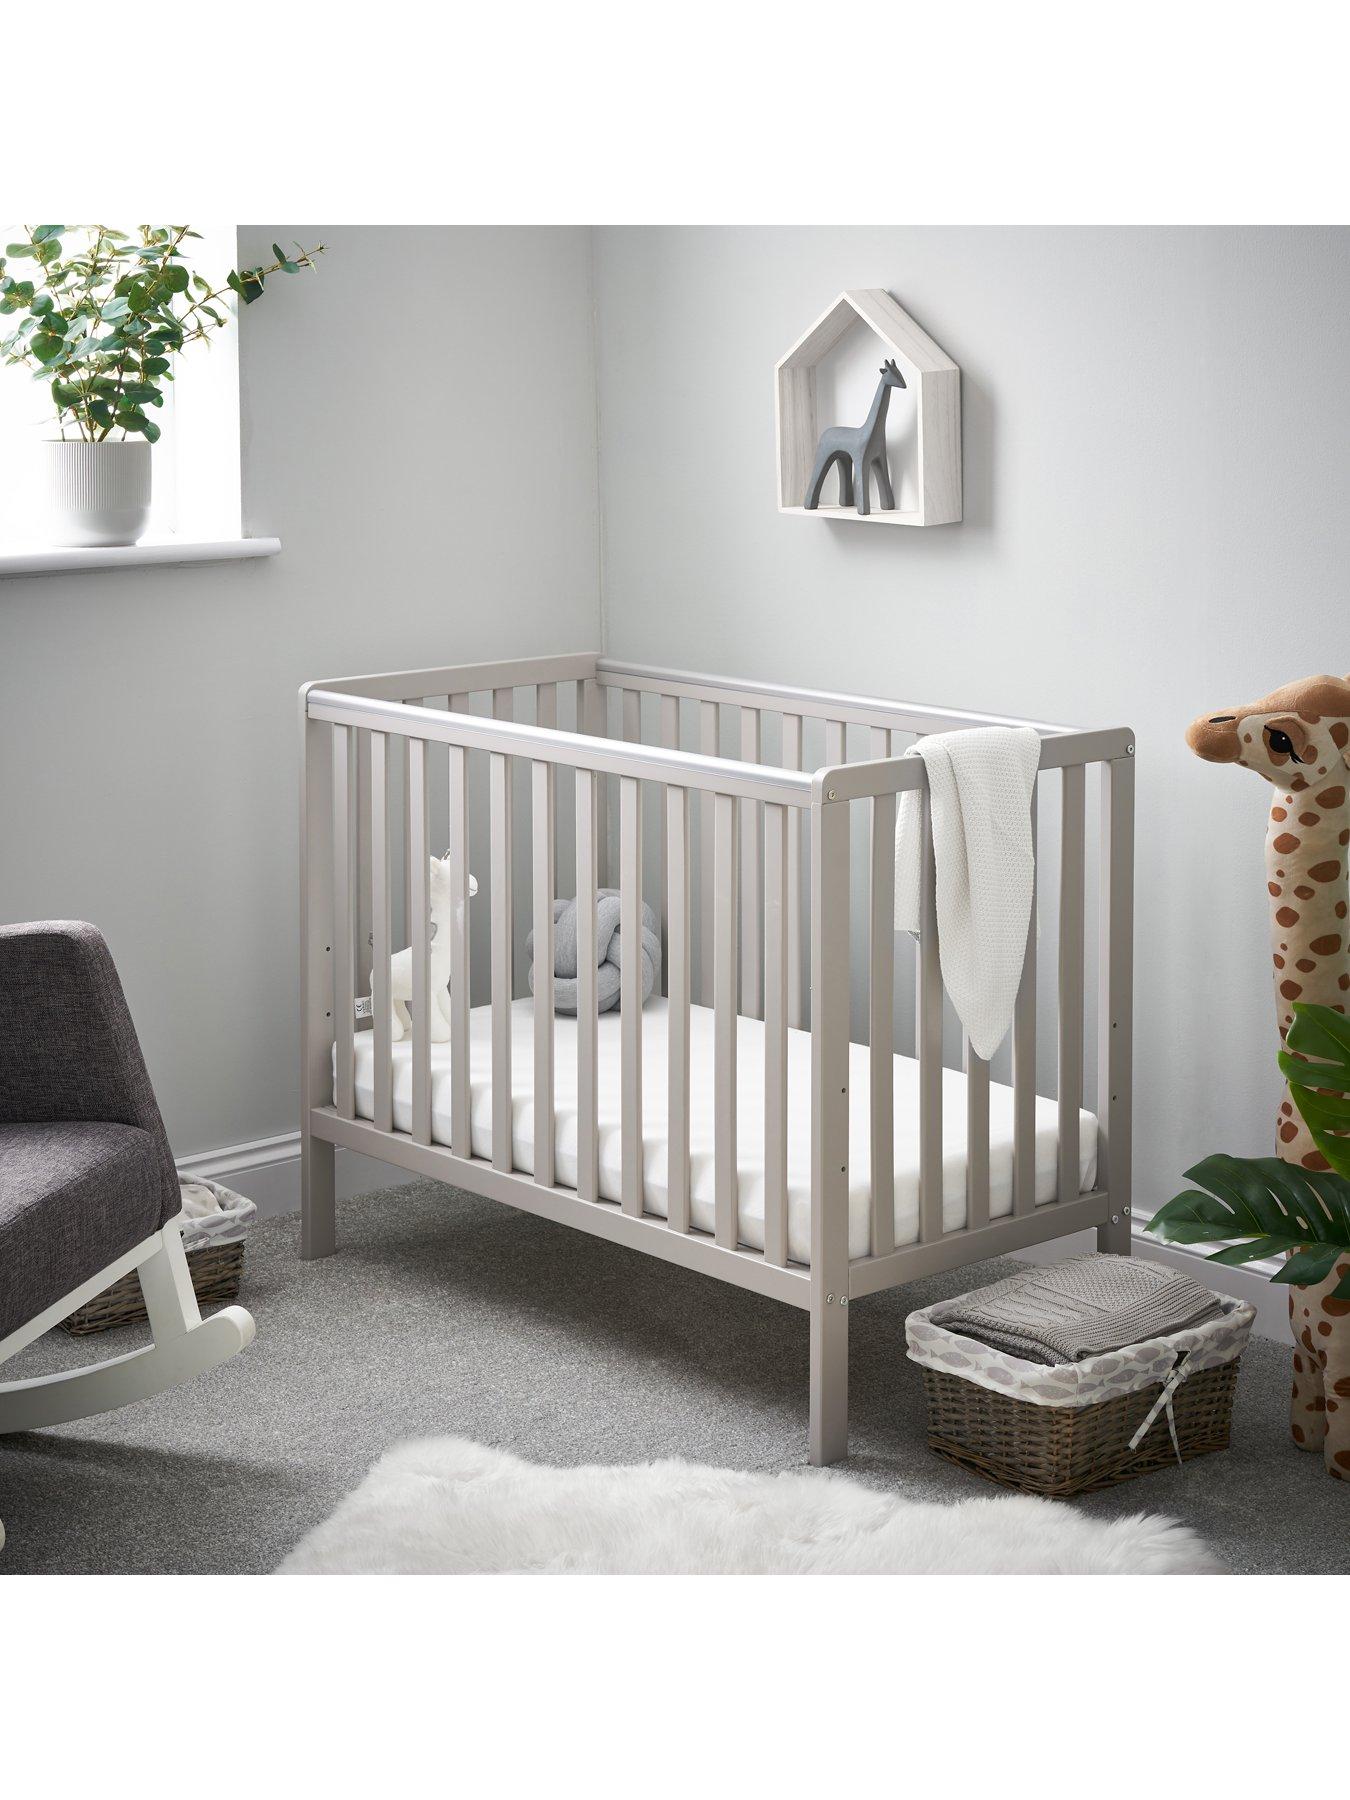 Obaby, Cots & cot beds, Nursery furniture, Child & baby